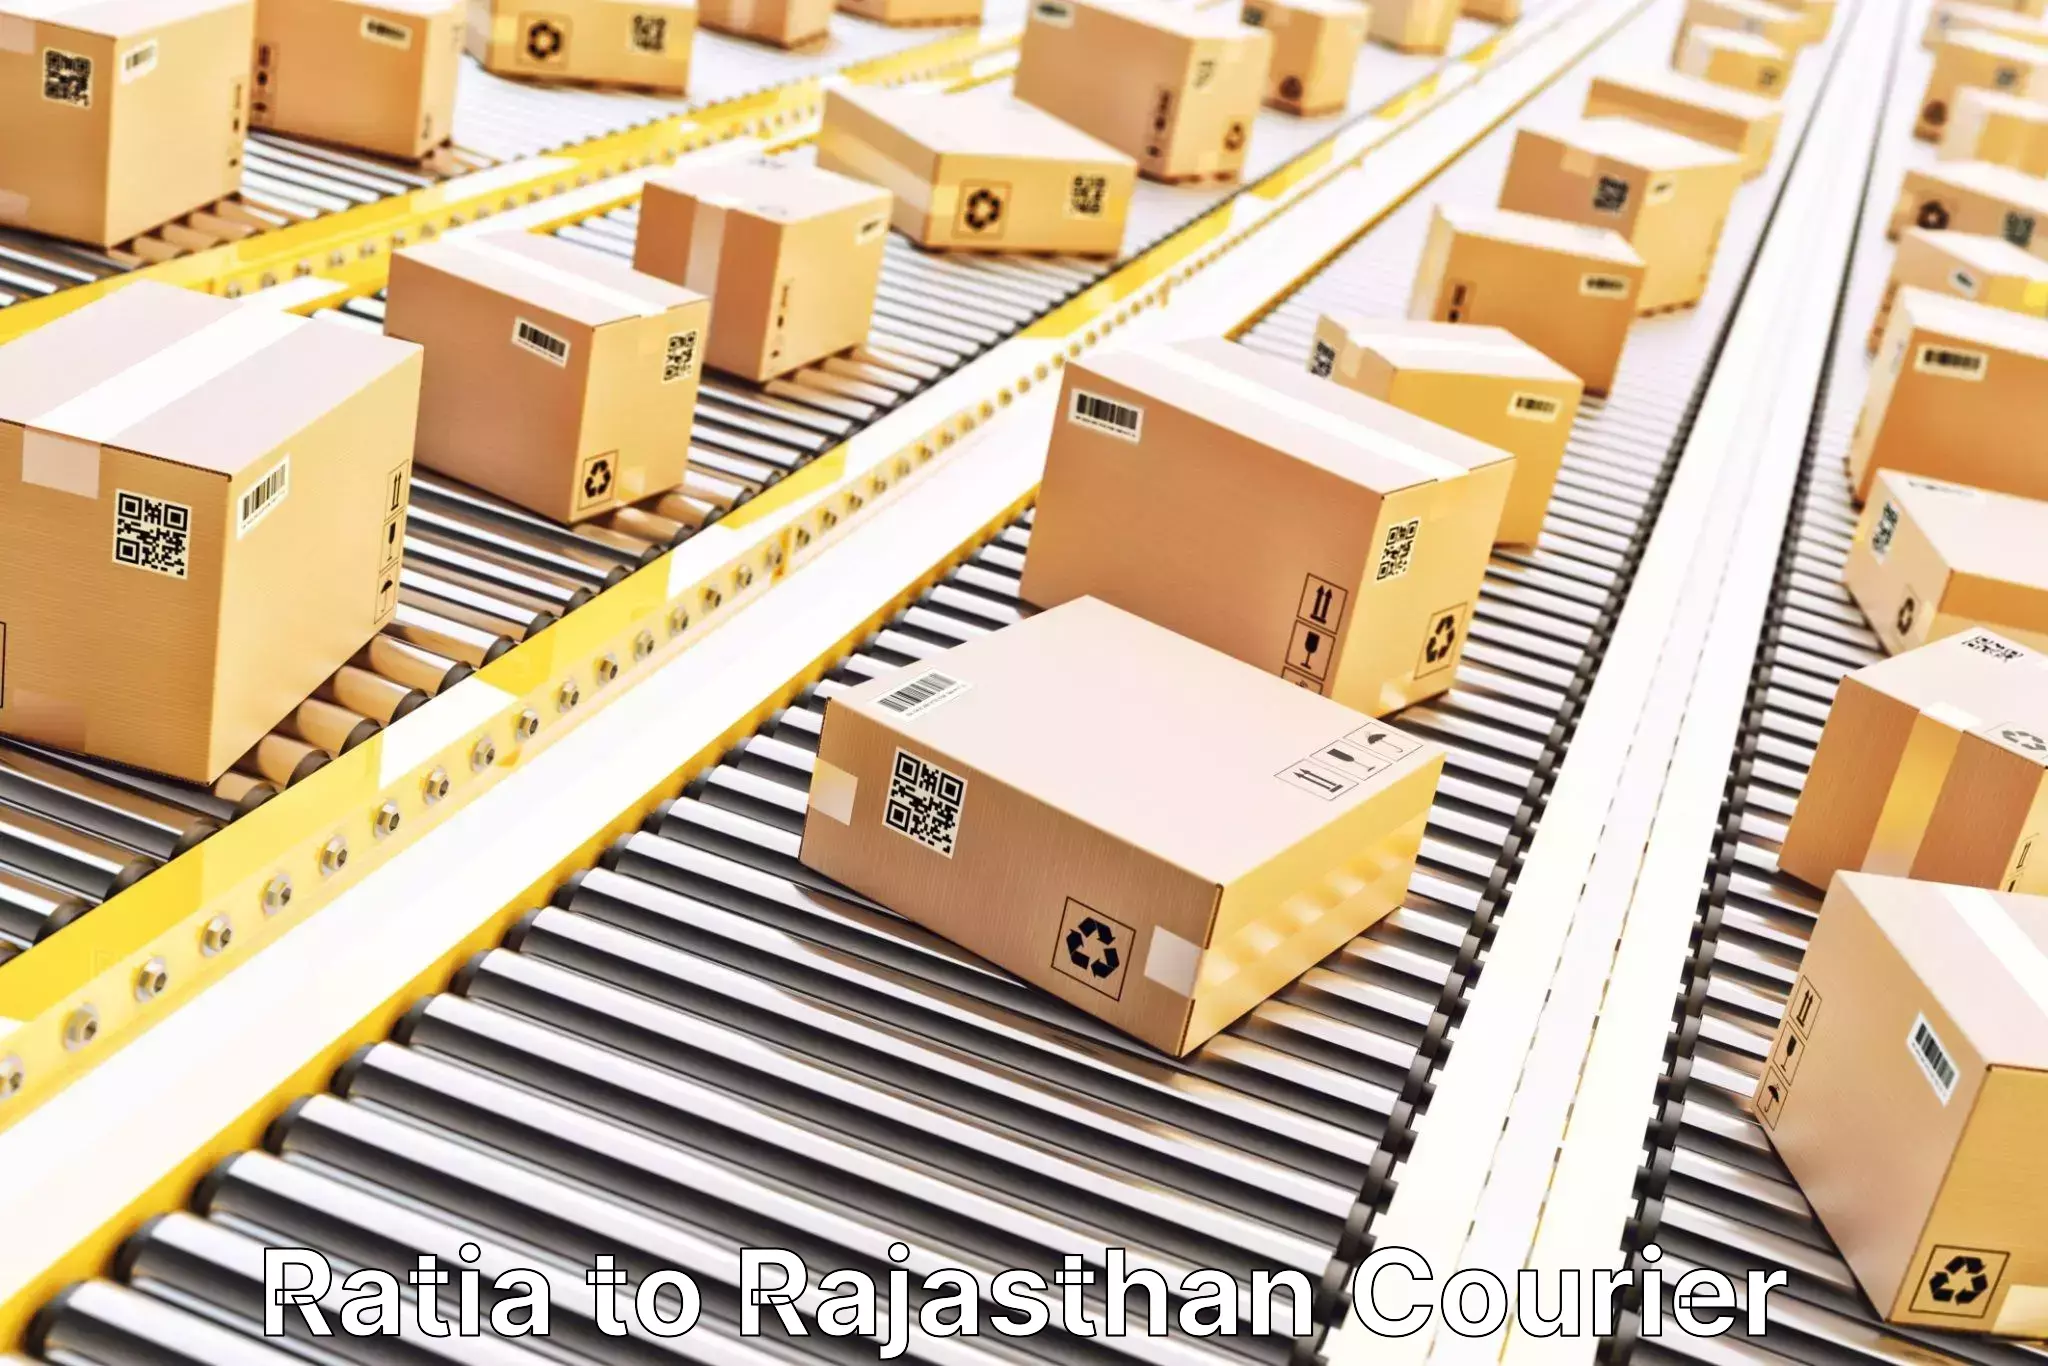 Multi-national courier services Ratia to Sikar